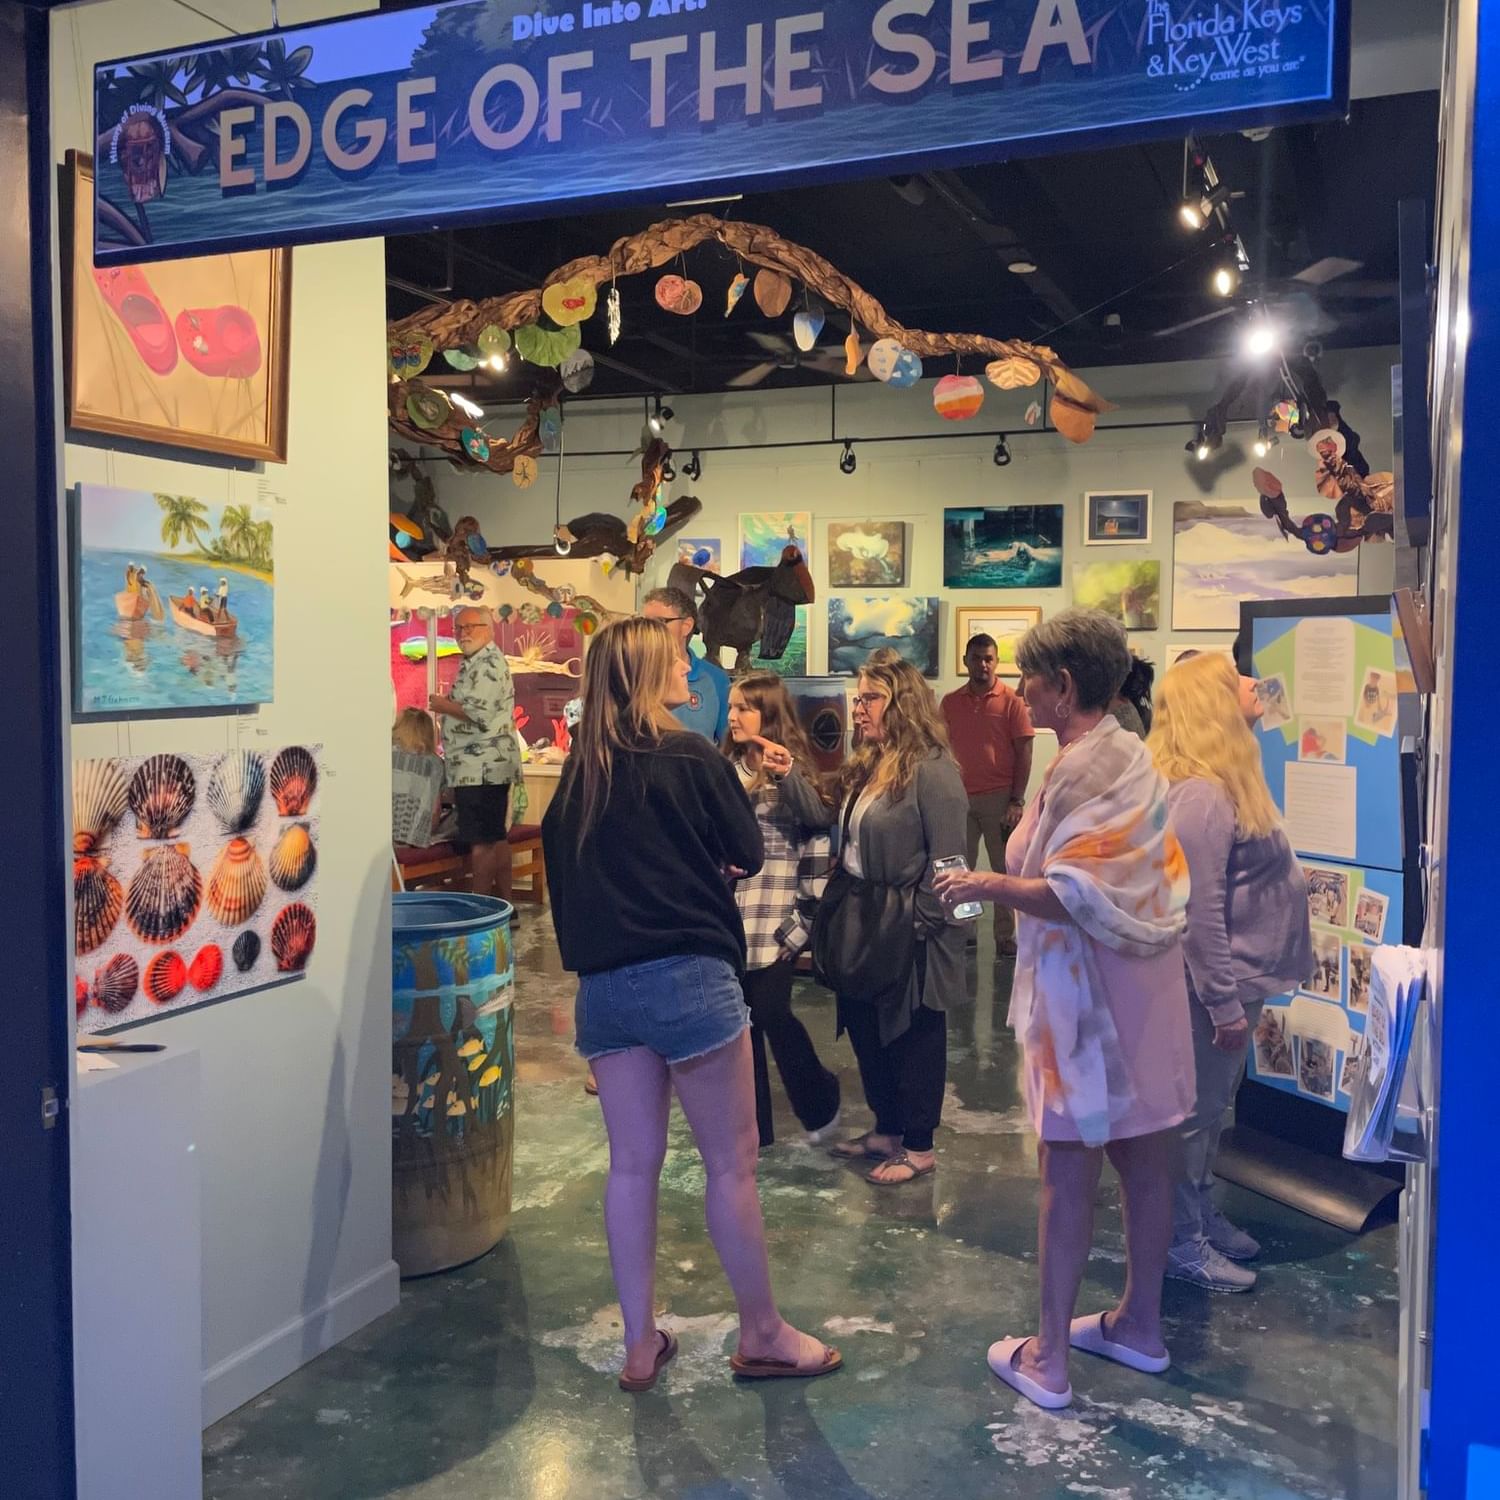 The Edge of the Sea Exhibit at the History of Diving Museum